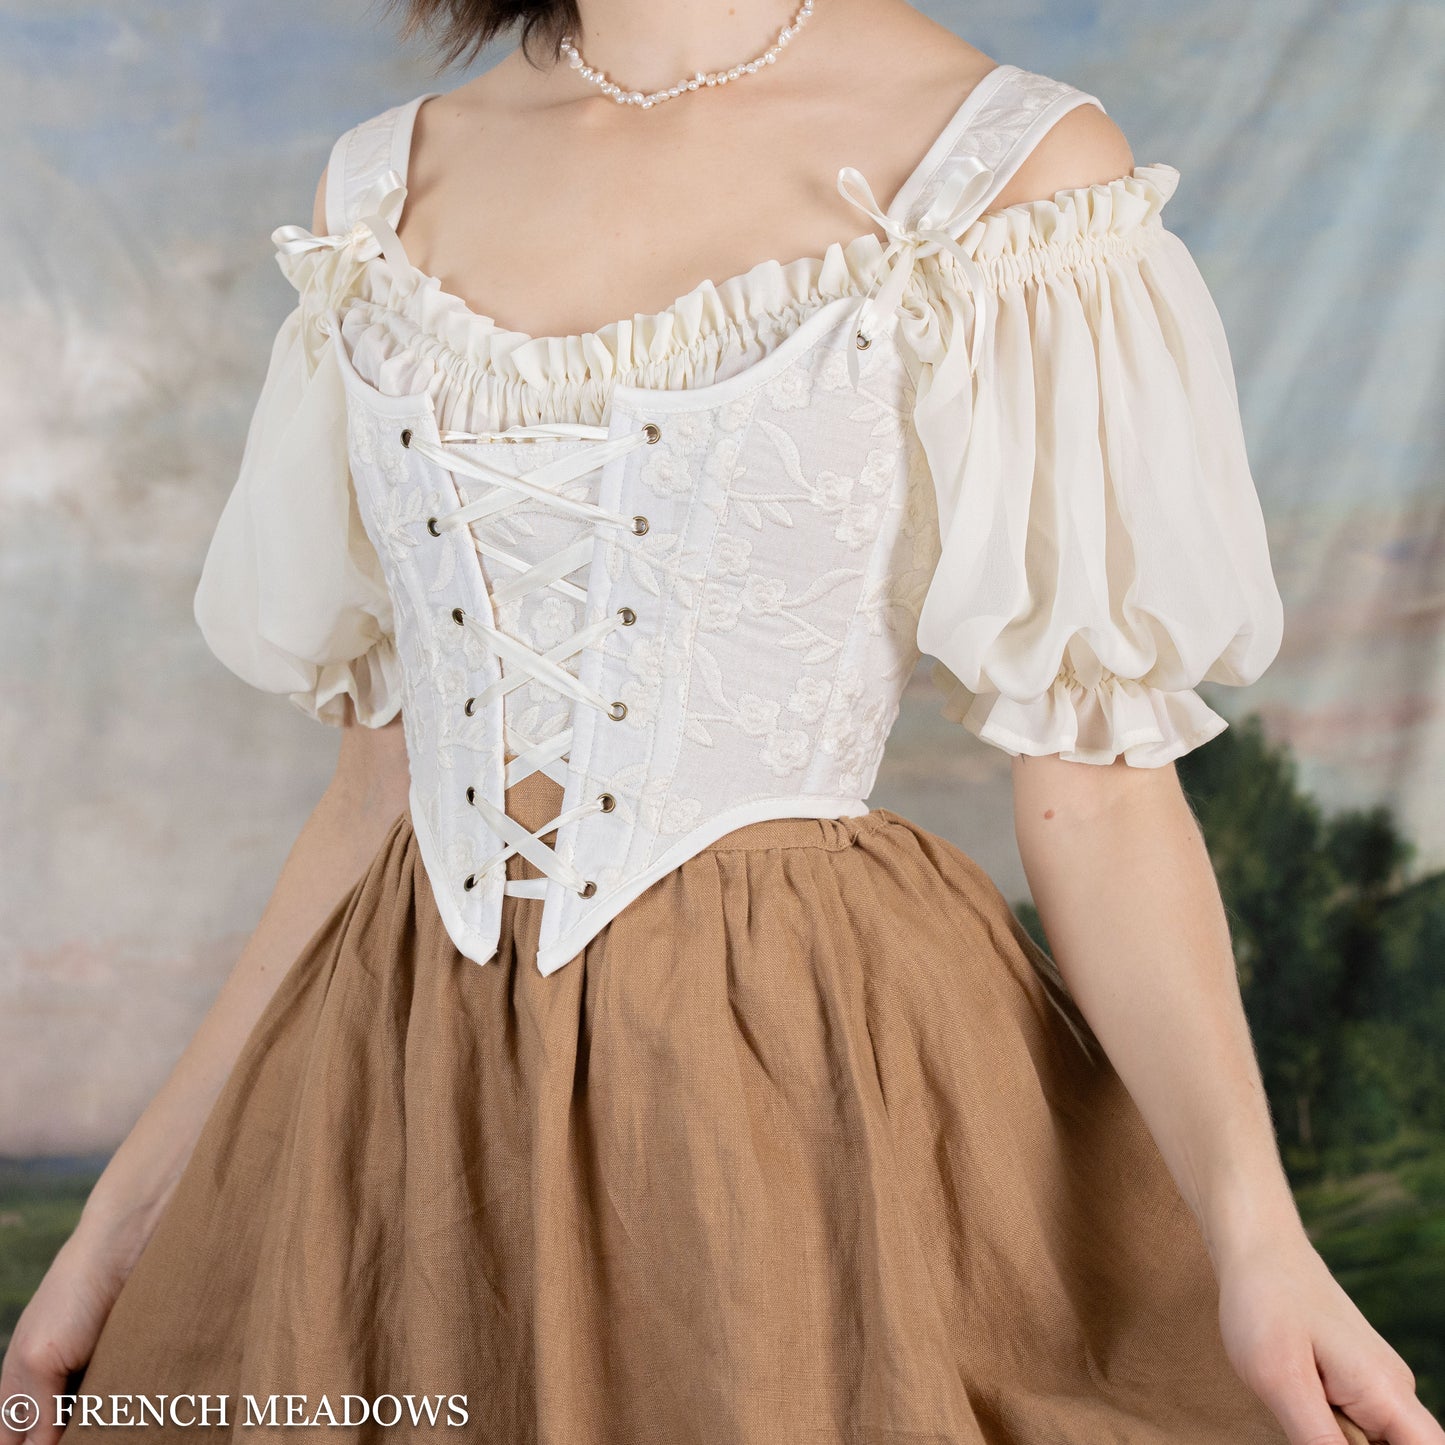 side view of model wearing a white floral renaissance bodice